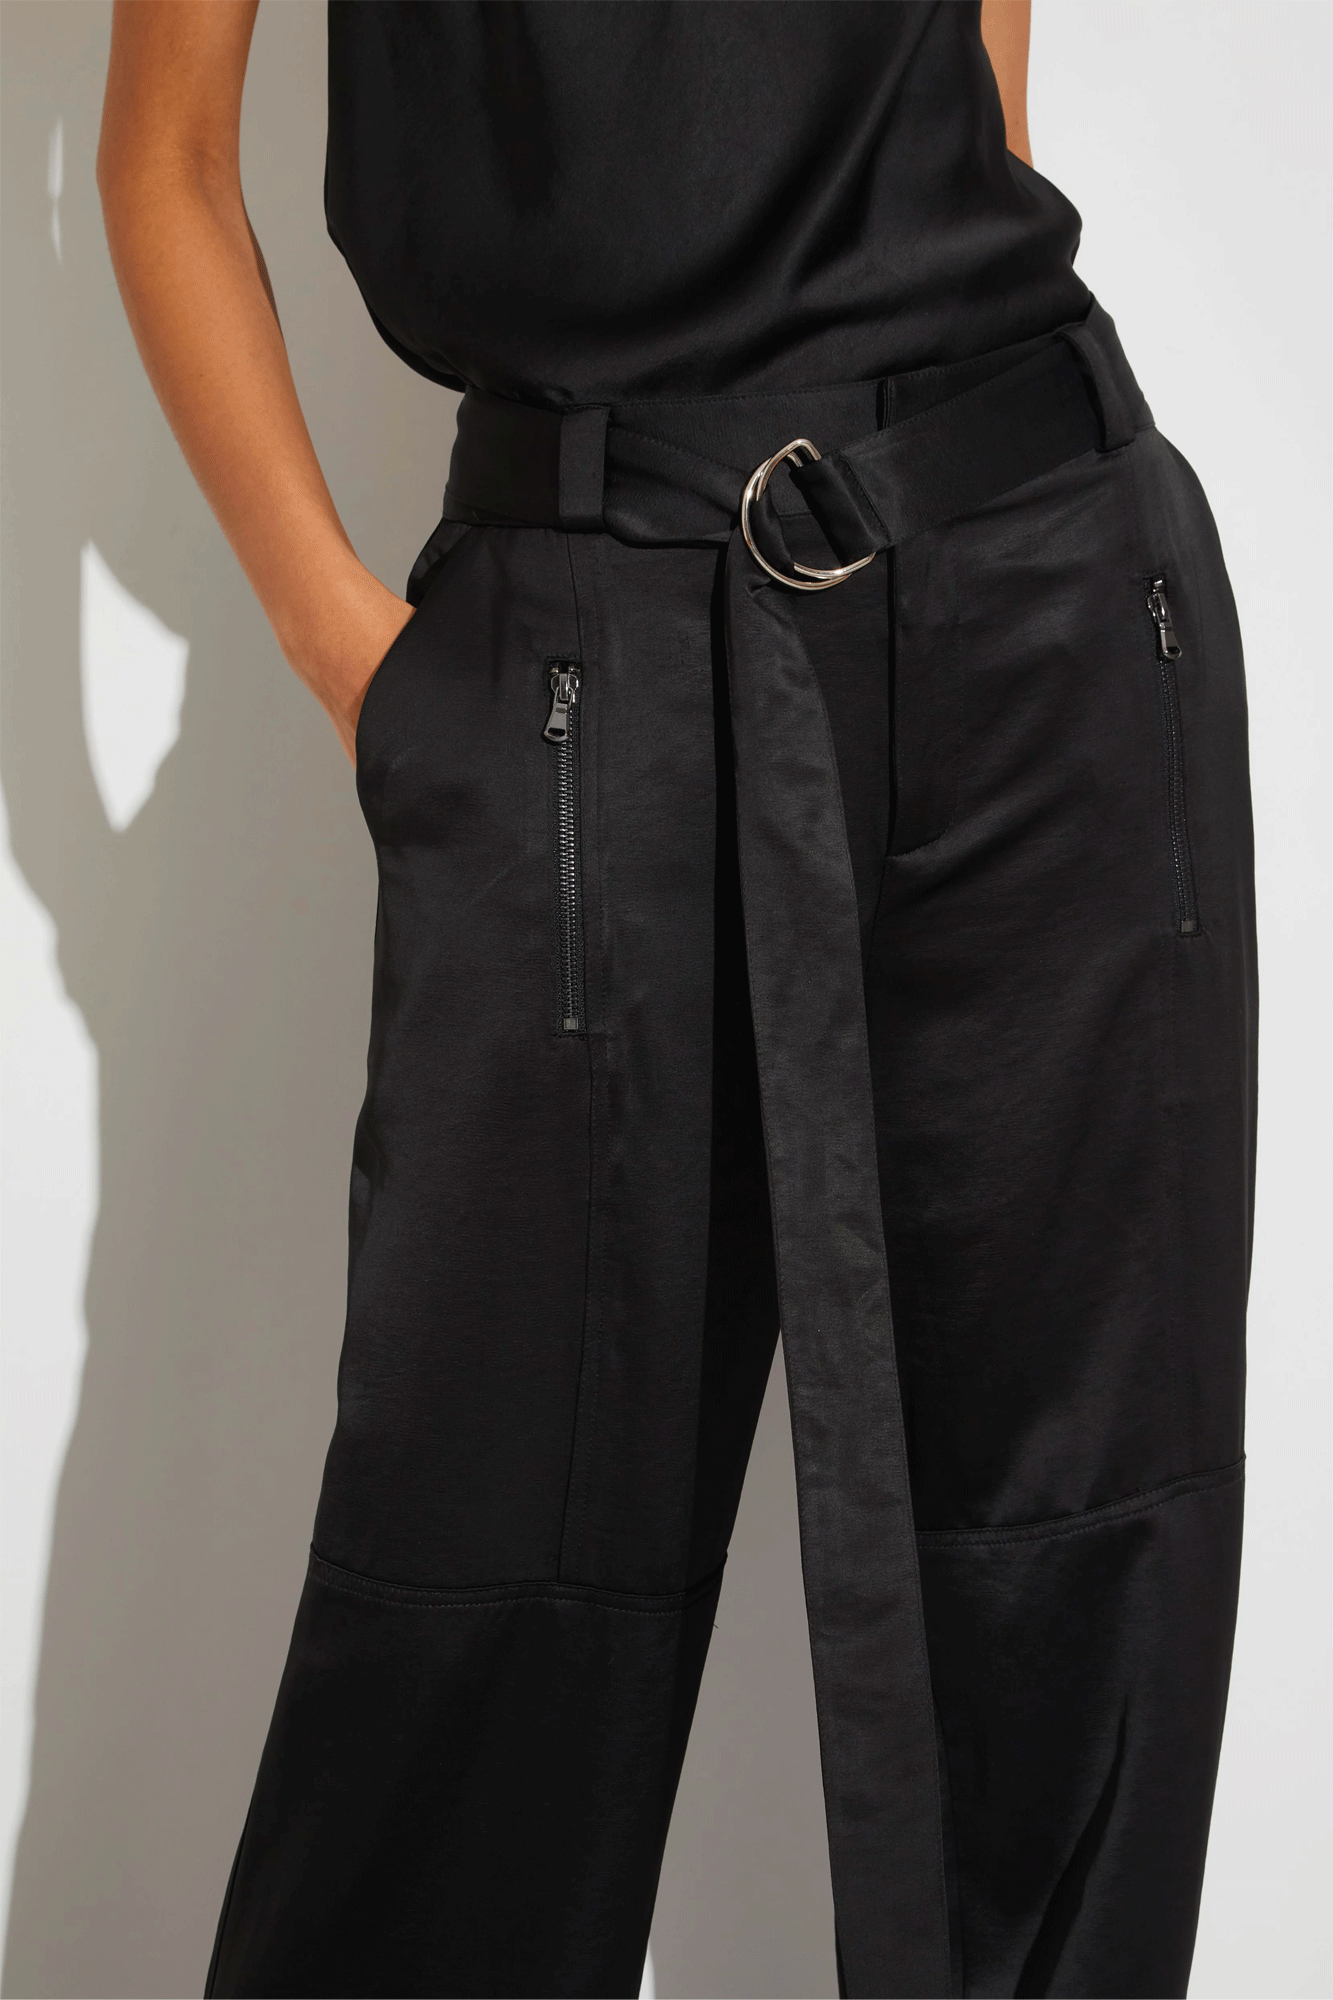 The Courtney Mid-Rise Charmeuse Pant from Saint Art offers a sophisticated look and feel. Made of wrinkle-proof and machine-washable material, the heavy-weight charmeuse cargo pant features oversized pocket and zipper detailing, belt loops and a detachable D-ring tie belt. Zipper pockets at front and back complete this stylish design.